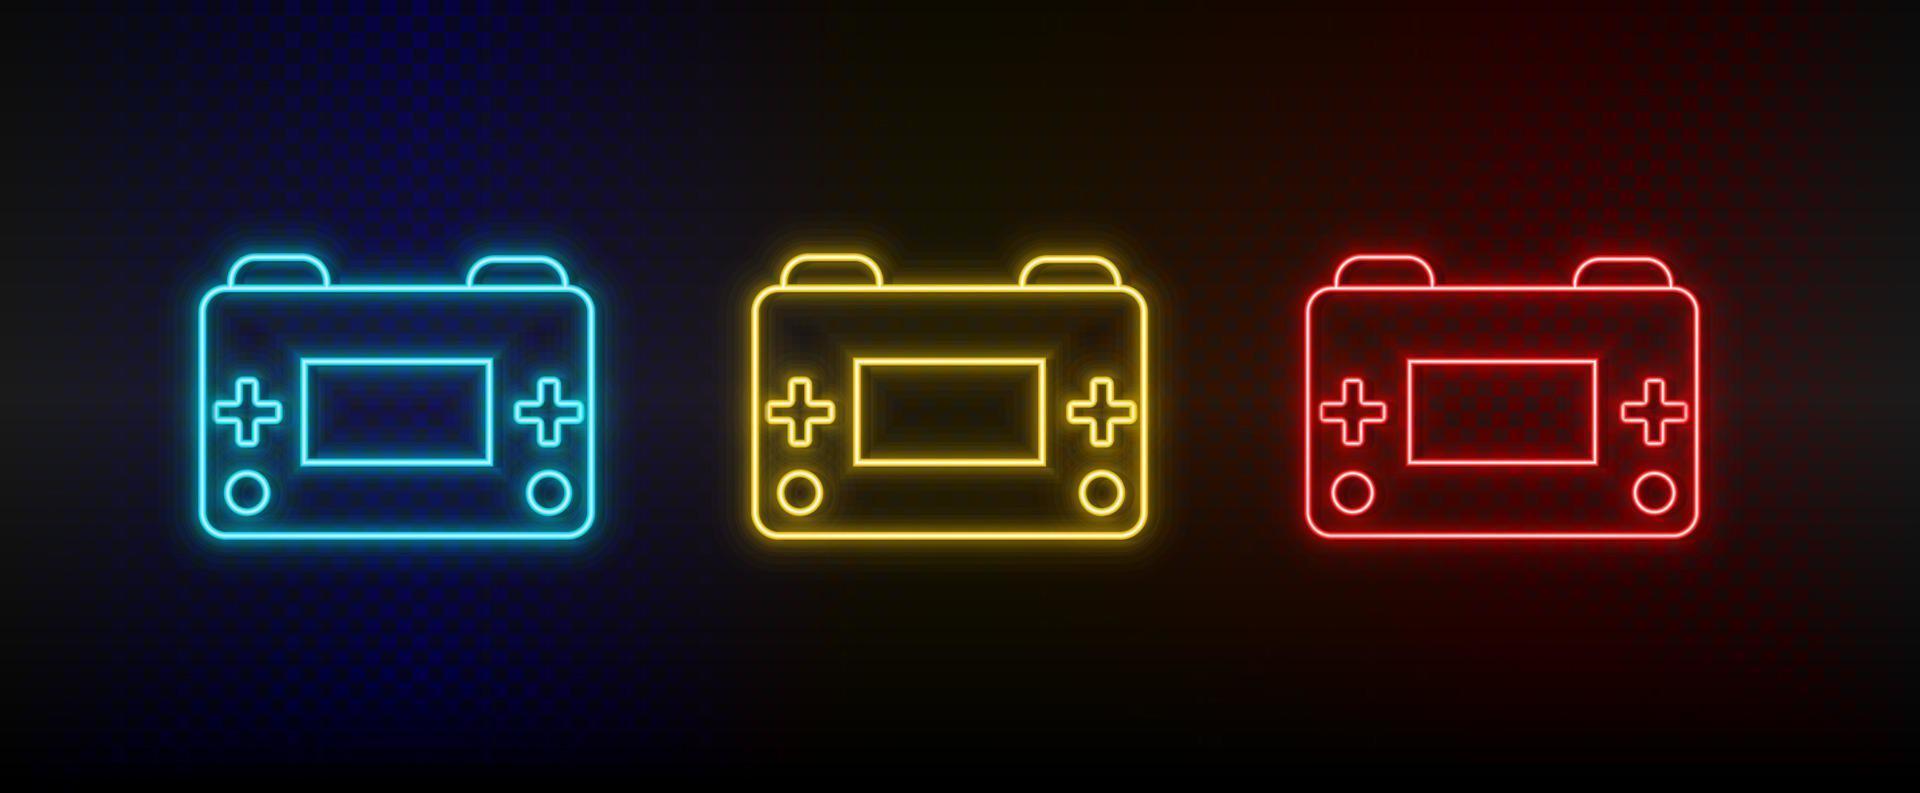 Neon icons. Retro arcade game console. Set of red, blue, yellow neon vector icon on darken background